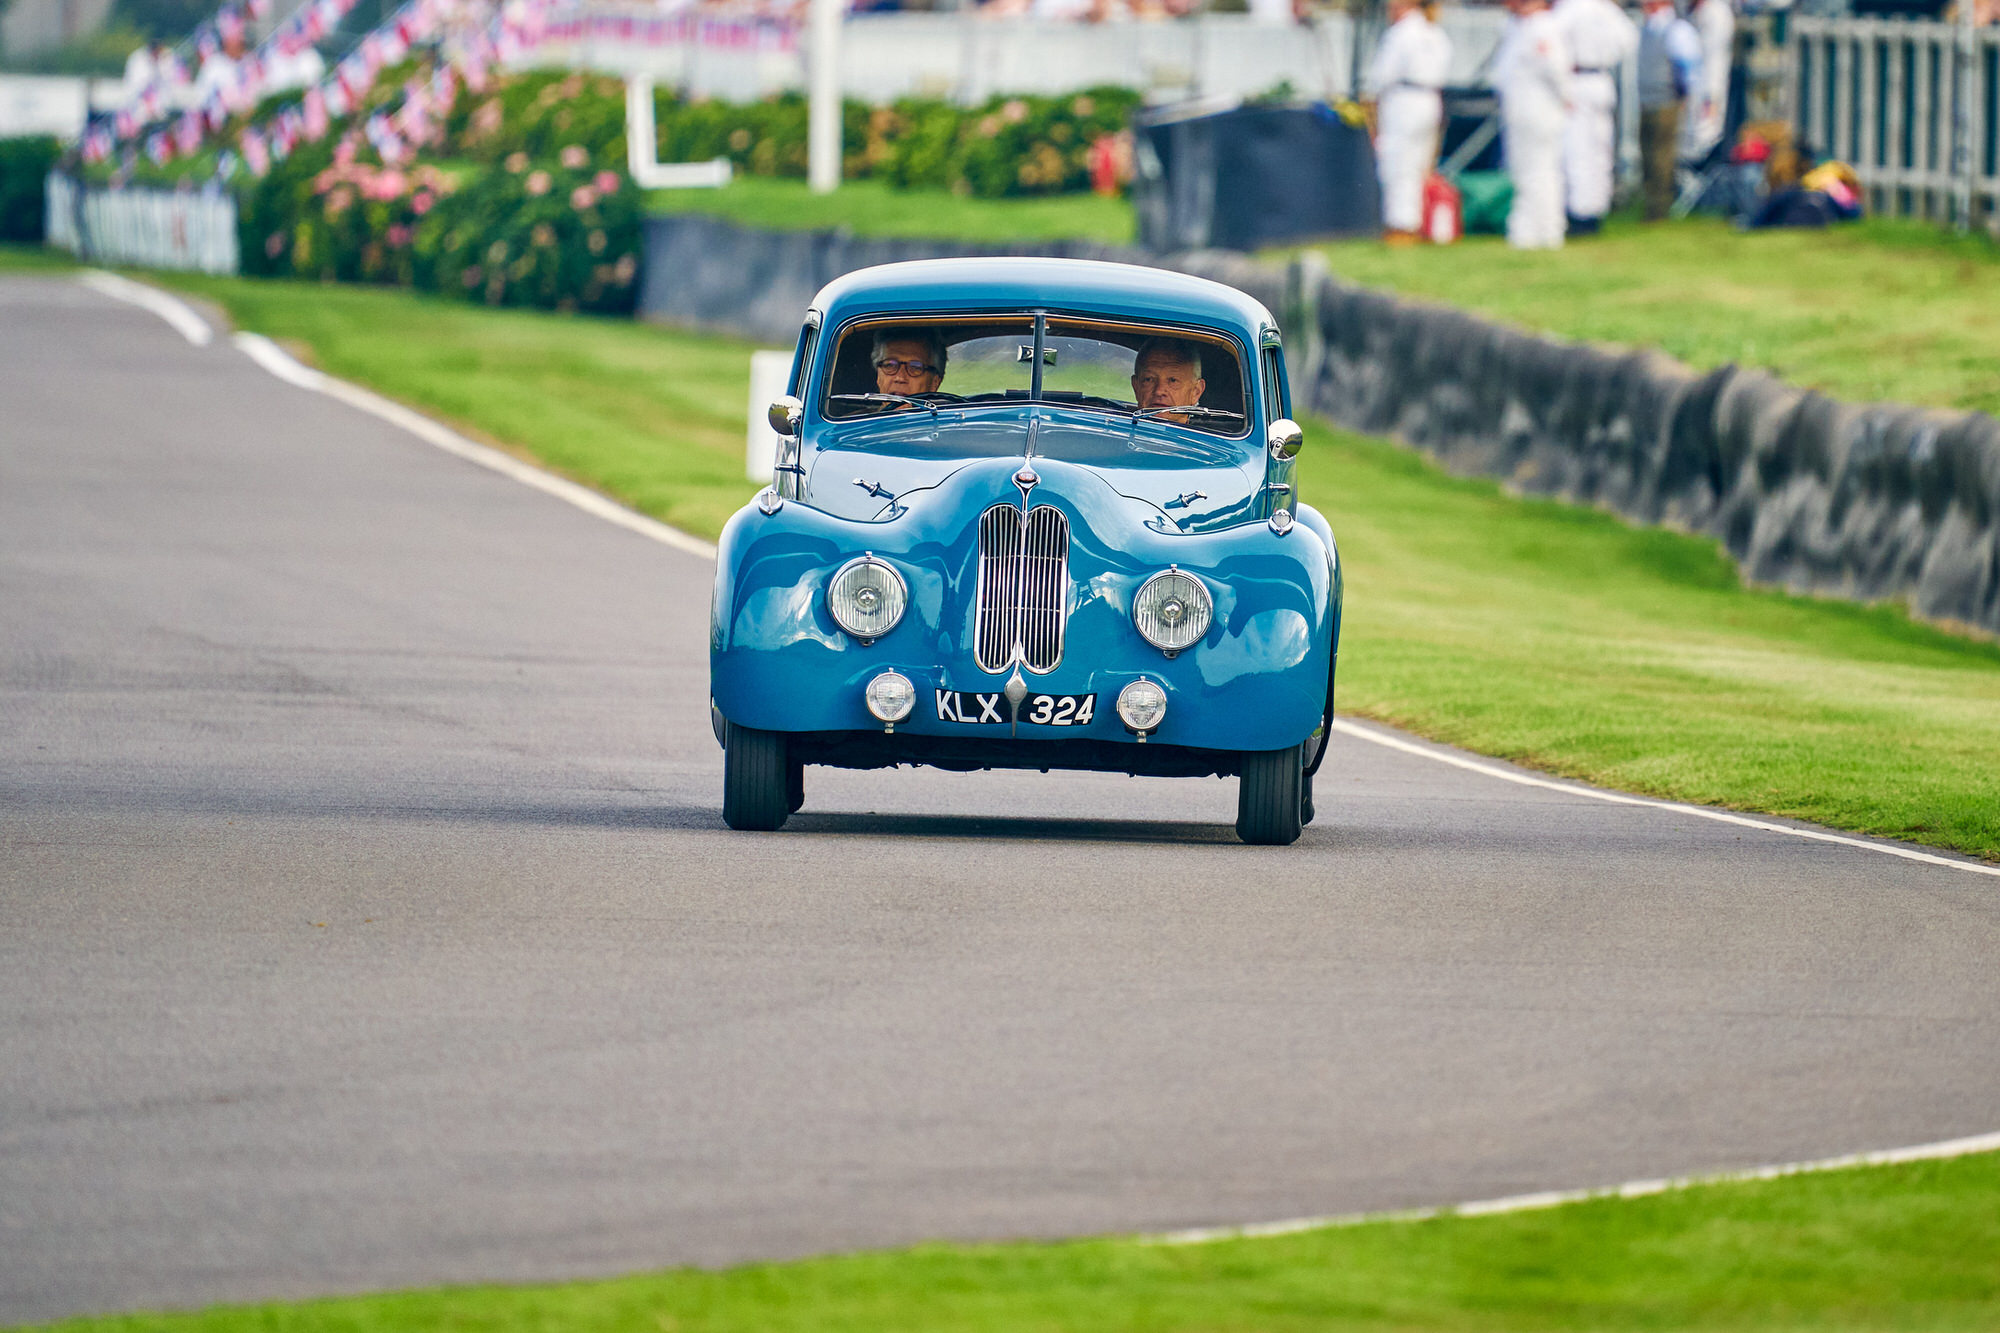 The Duke of Richmond opens the 2023 Goodwood Revival 2023 in a Bristol 400. Ph. by Dominic James.